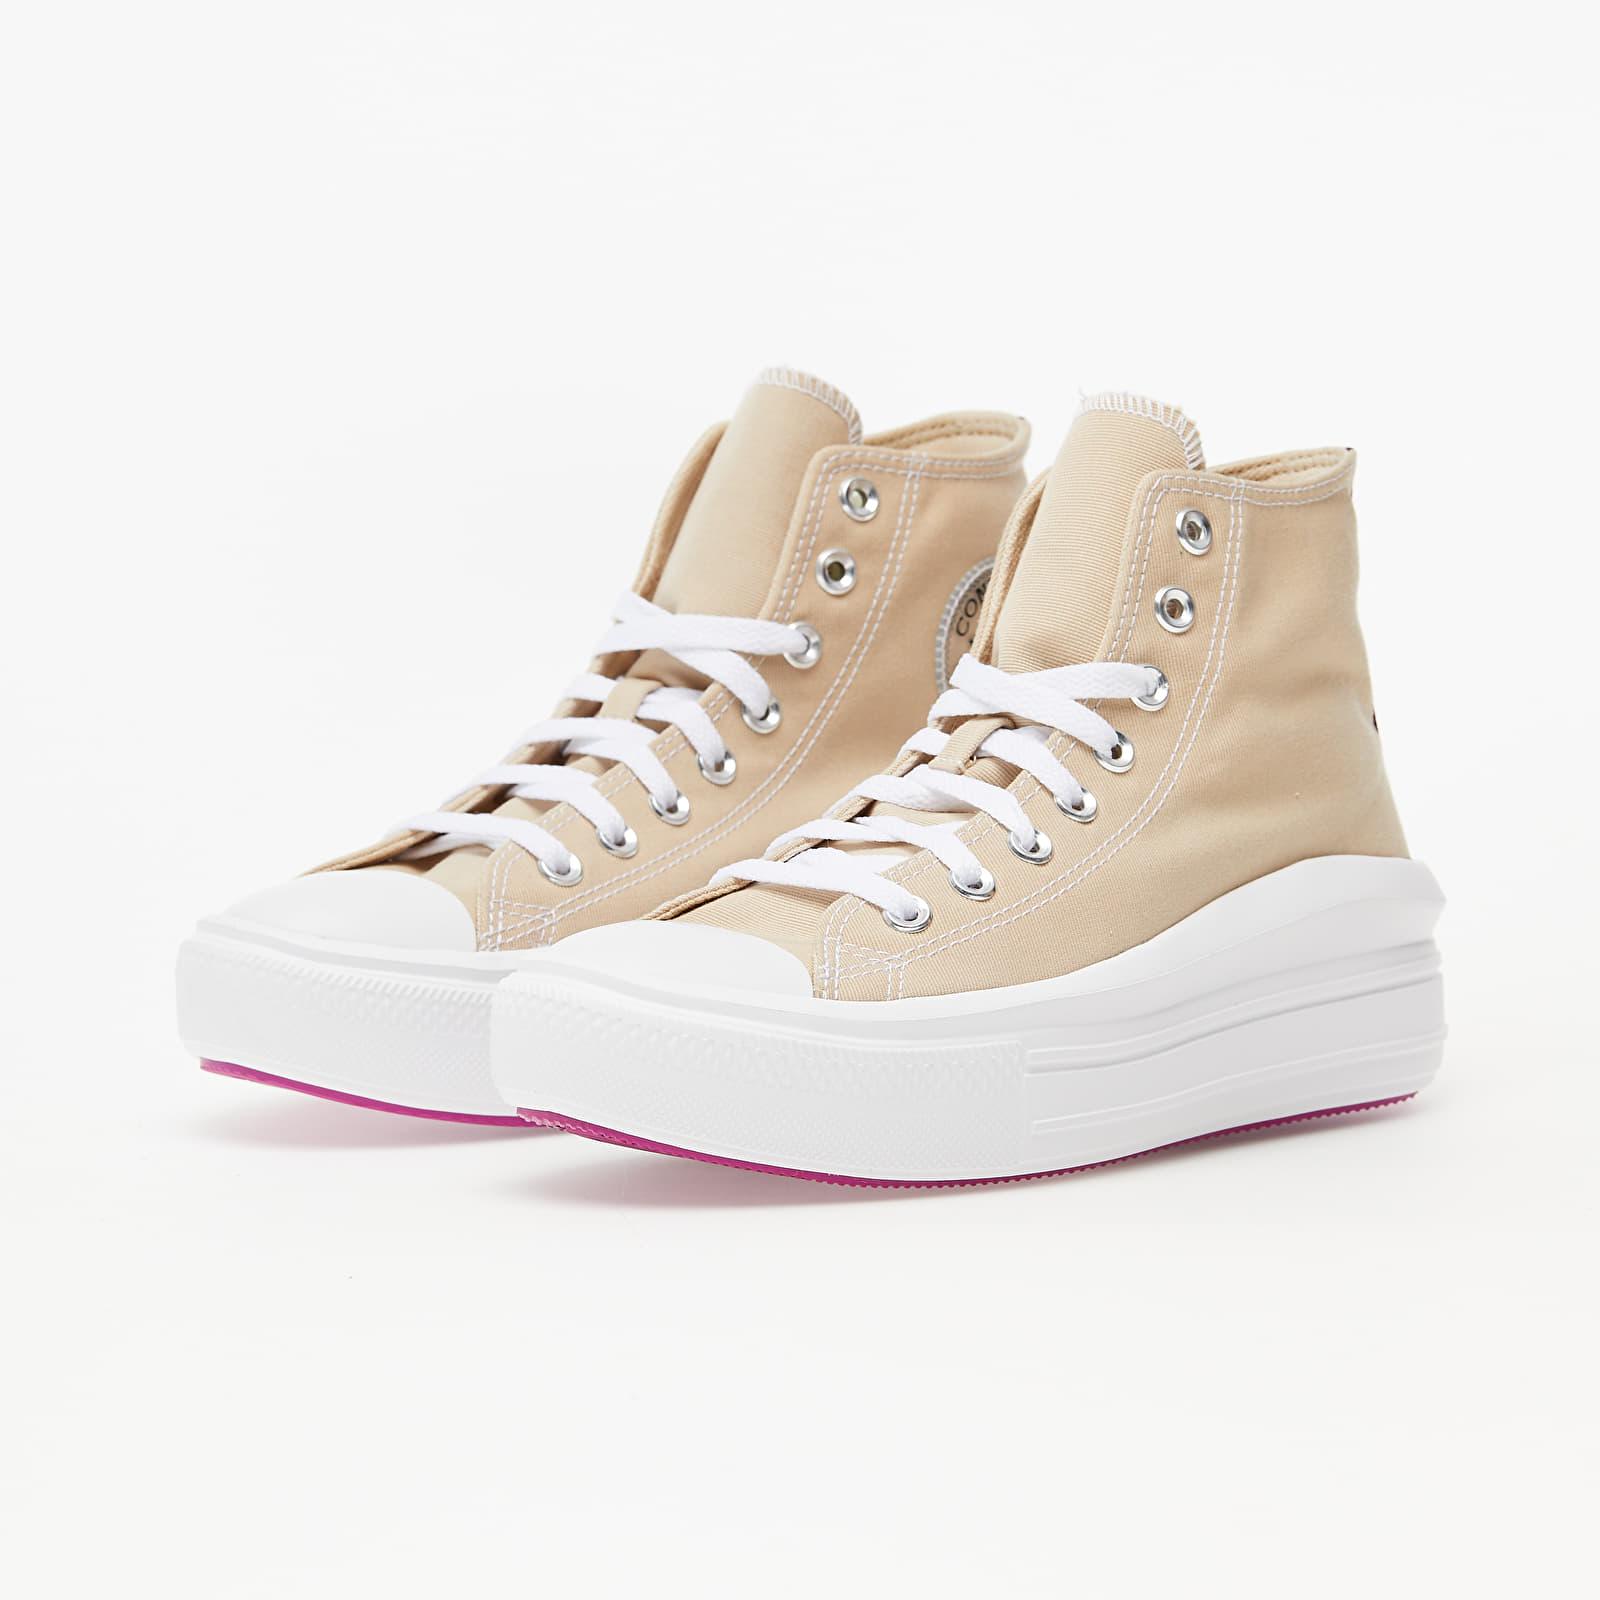 Converse Chuck Taylor All Star Move Farro/ Cactus Flower/ White in Brown |  Lyst